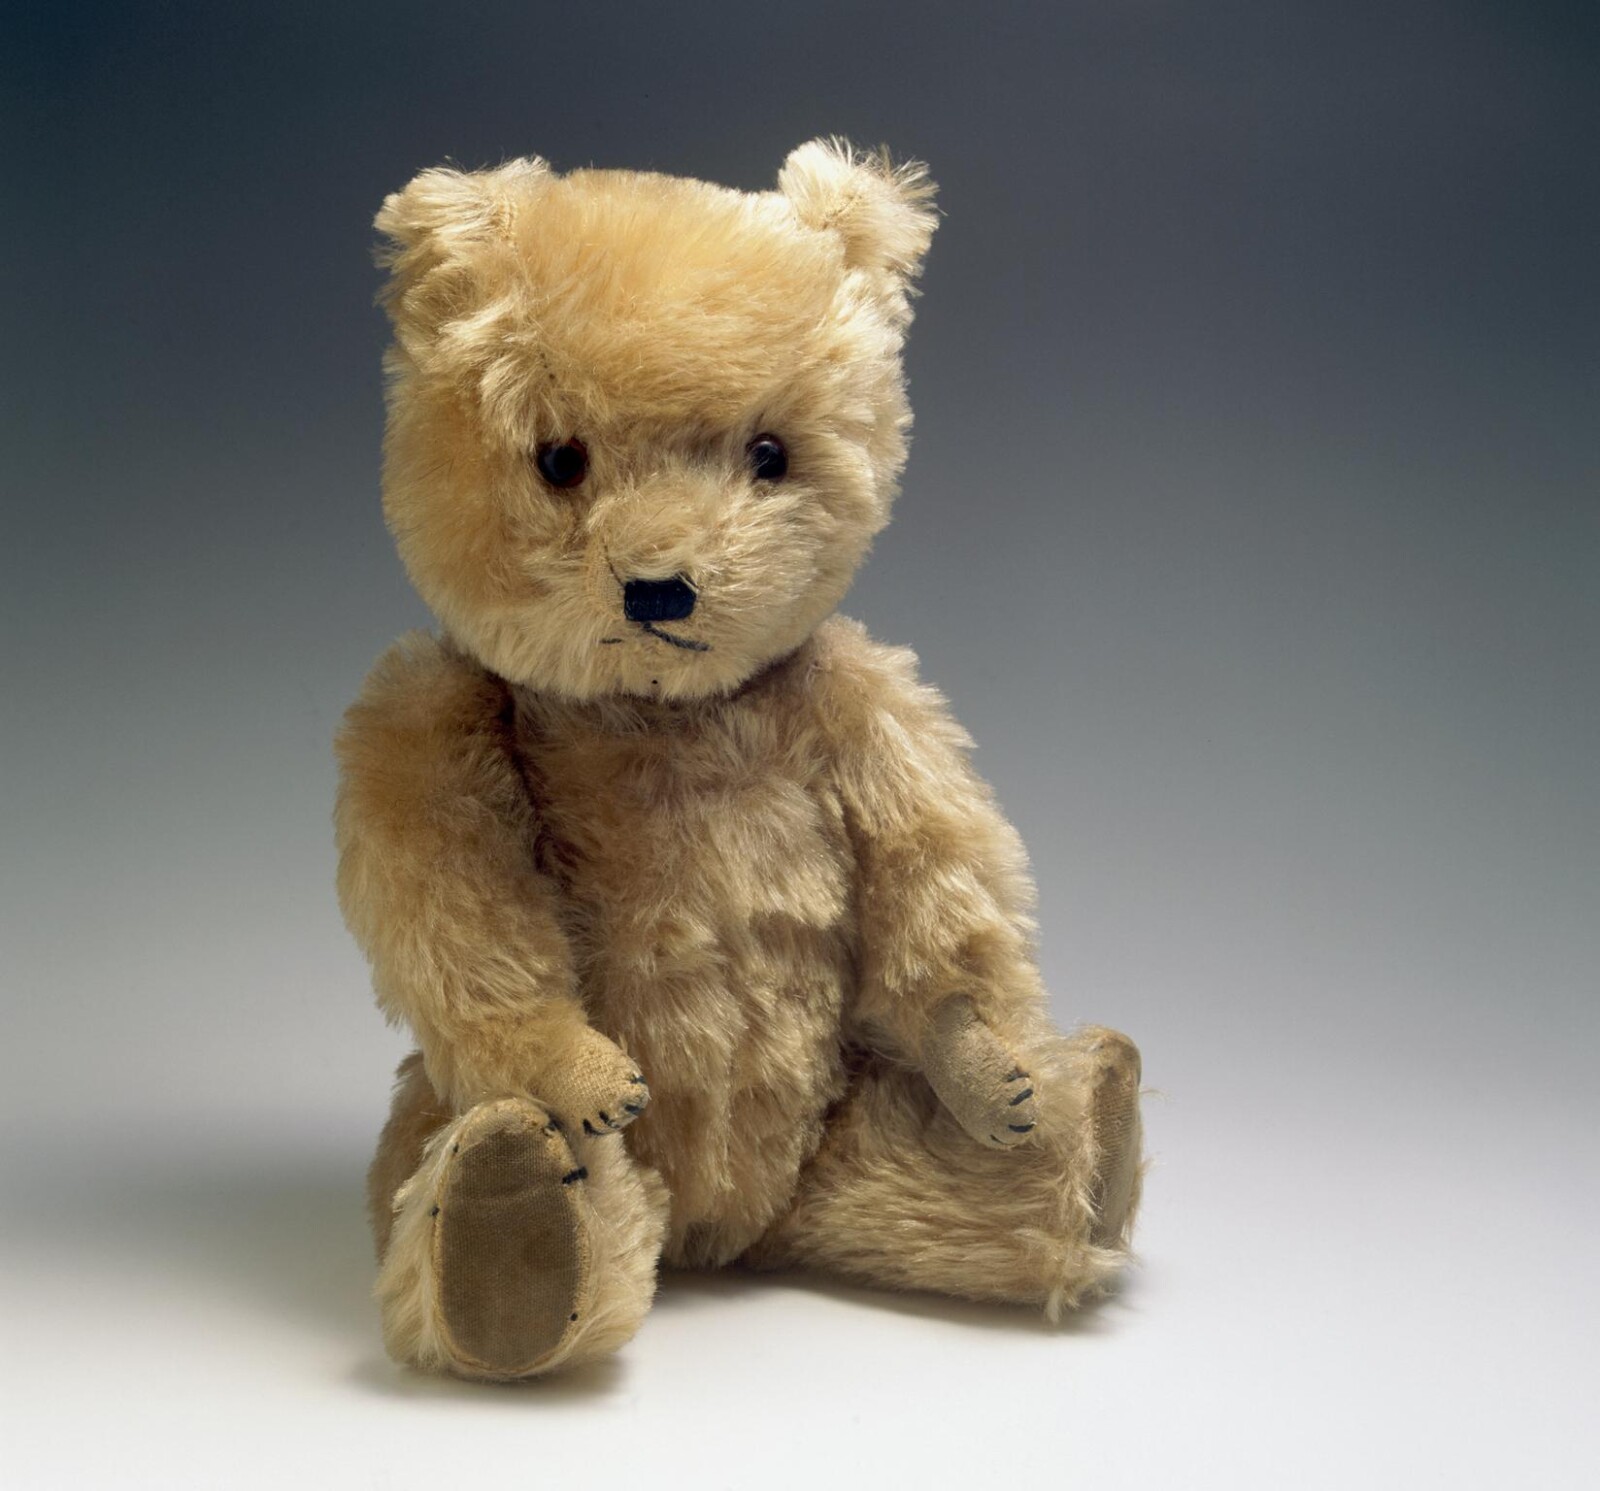 A vintage teddy bear with a light brown, slightly worn fur. The teddy bear is sitting upright against a plain, gradient background that transitions from white at the top to dark grey at the bottom.